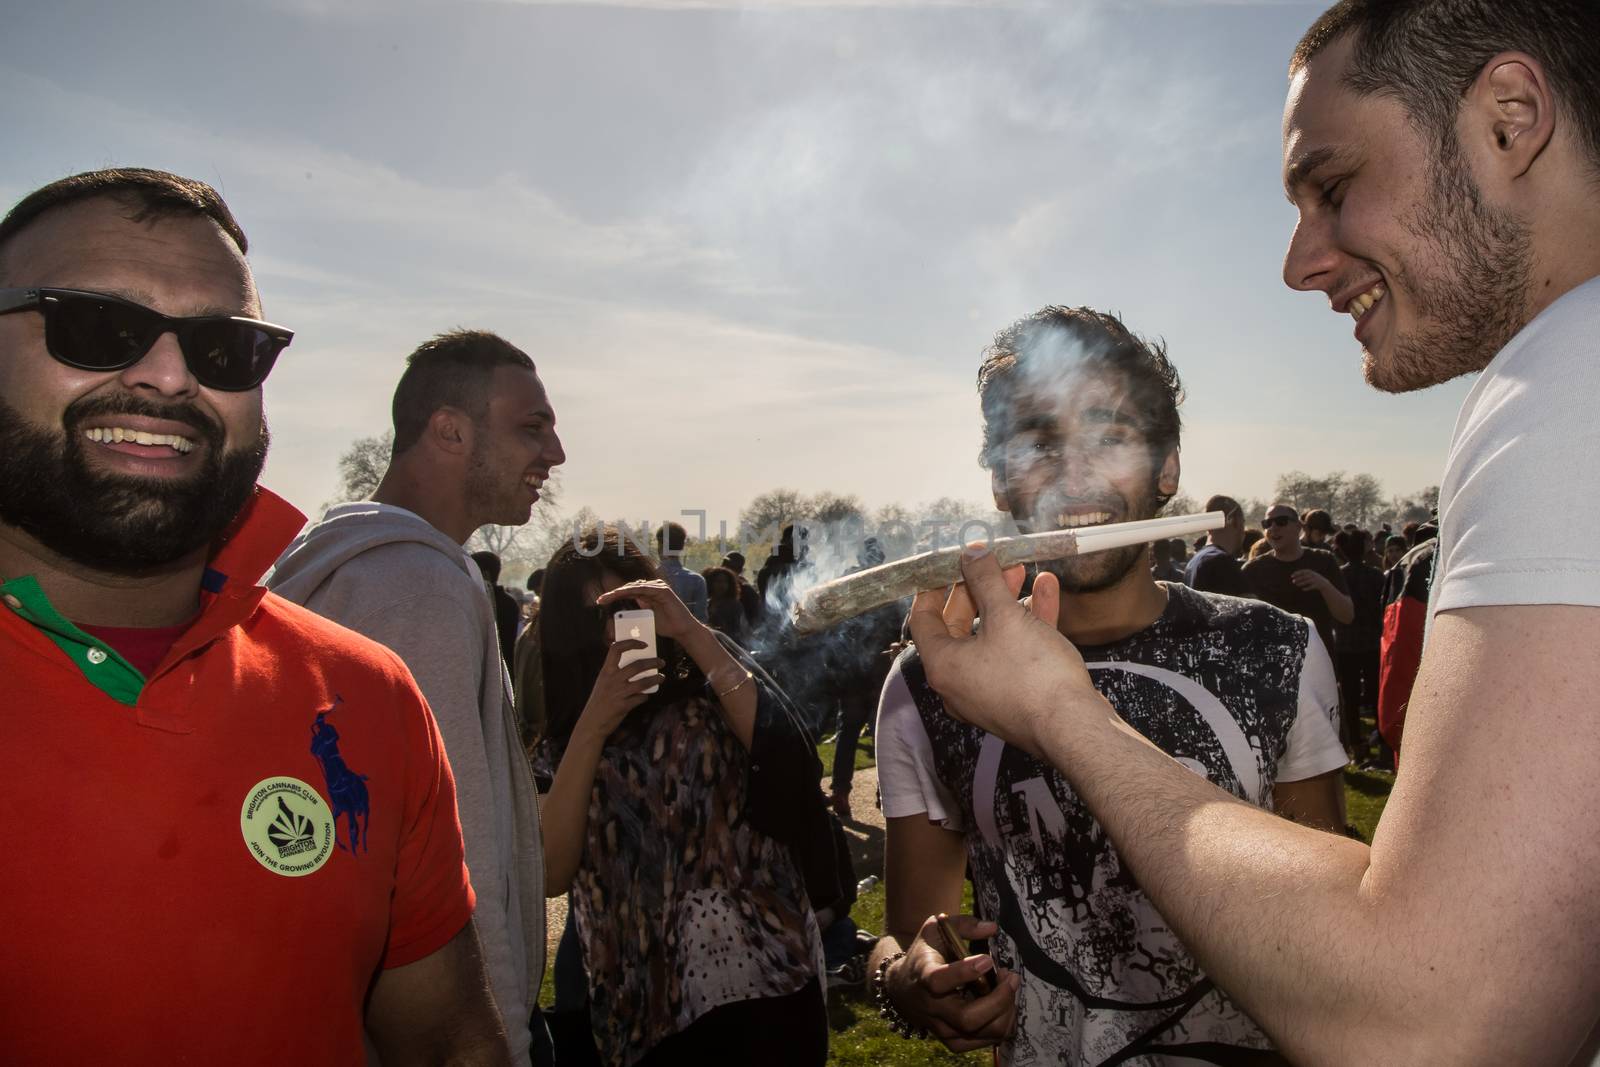 UNITED-KINGDOM, London: A man smokes a large reefer as hundreds of pro-cannabis supporters gather in Hyde Park, in London for 4/20 day, a giant annual smoke-in  on April 20, 2016. 